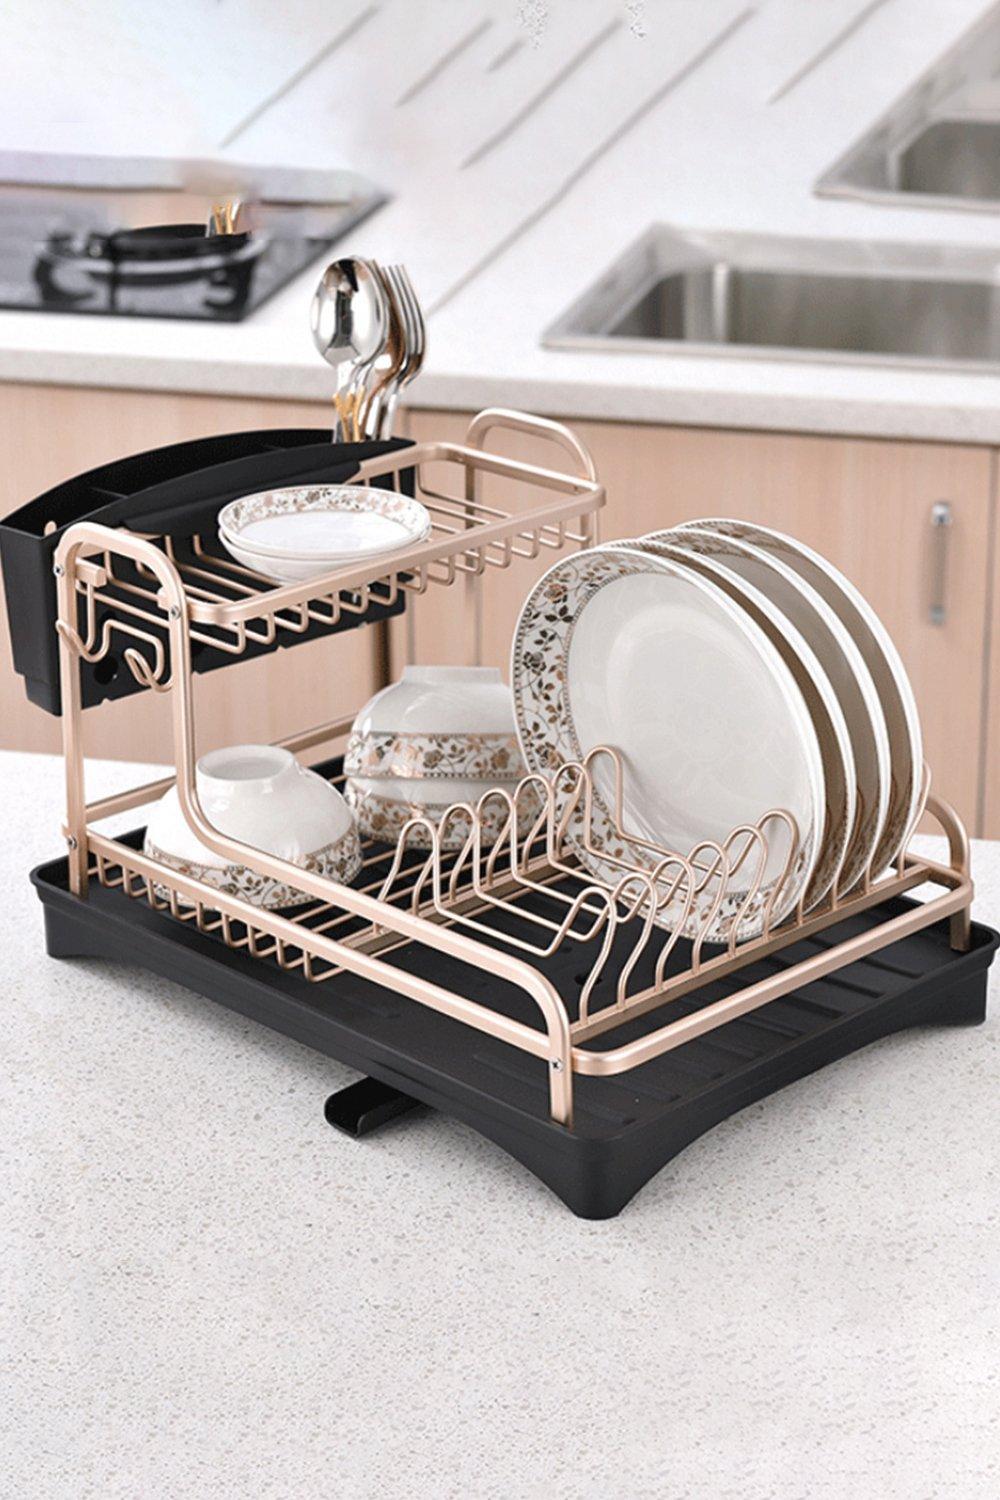 2-Tier Dish Drainer Rack Storage  Organization Shelf with Removable Drip Tray & Cutlery Holder Kitch